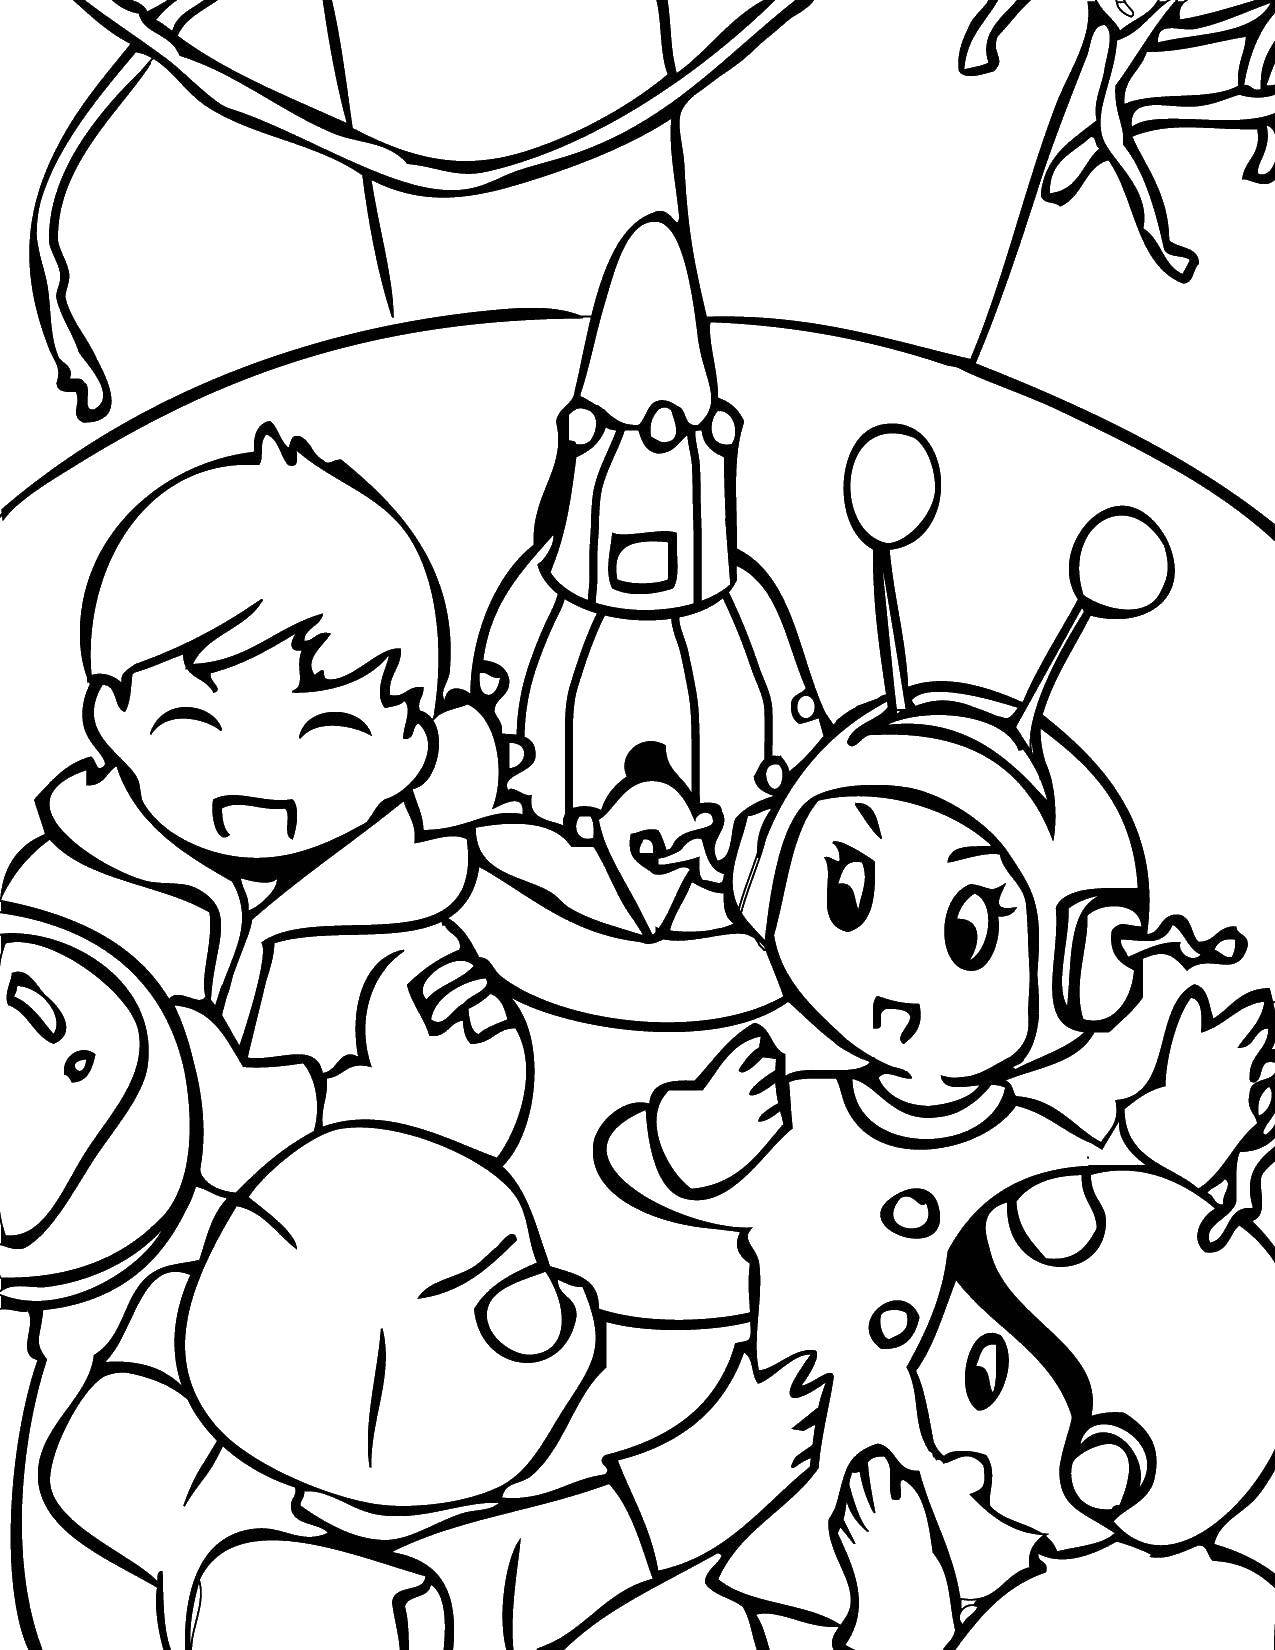 Coloring Alien family. Category spaceships. Tags:  Space, aliens, stars.